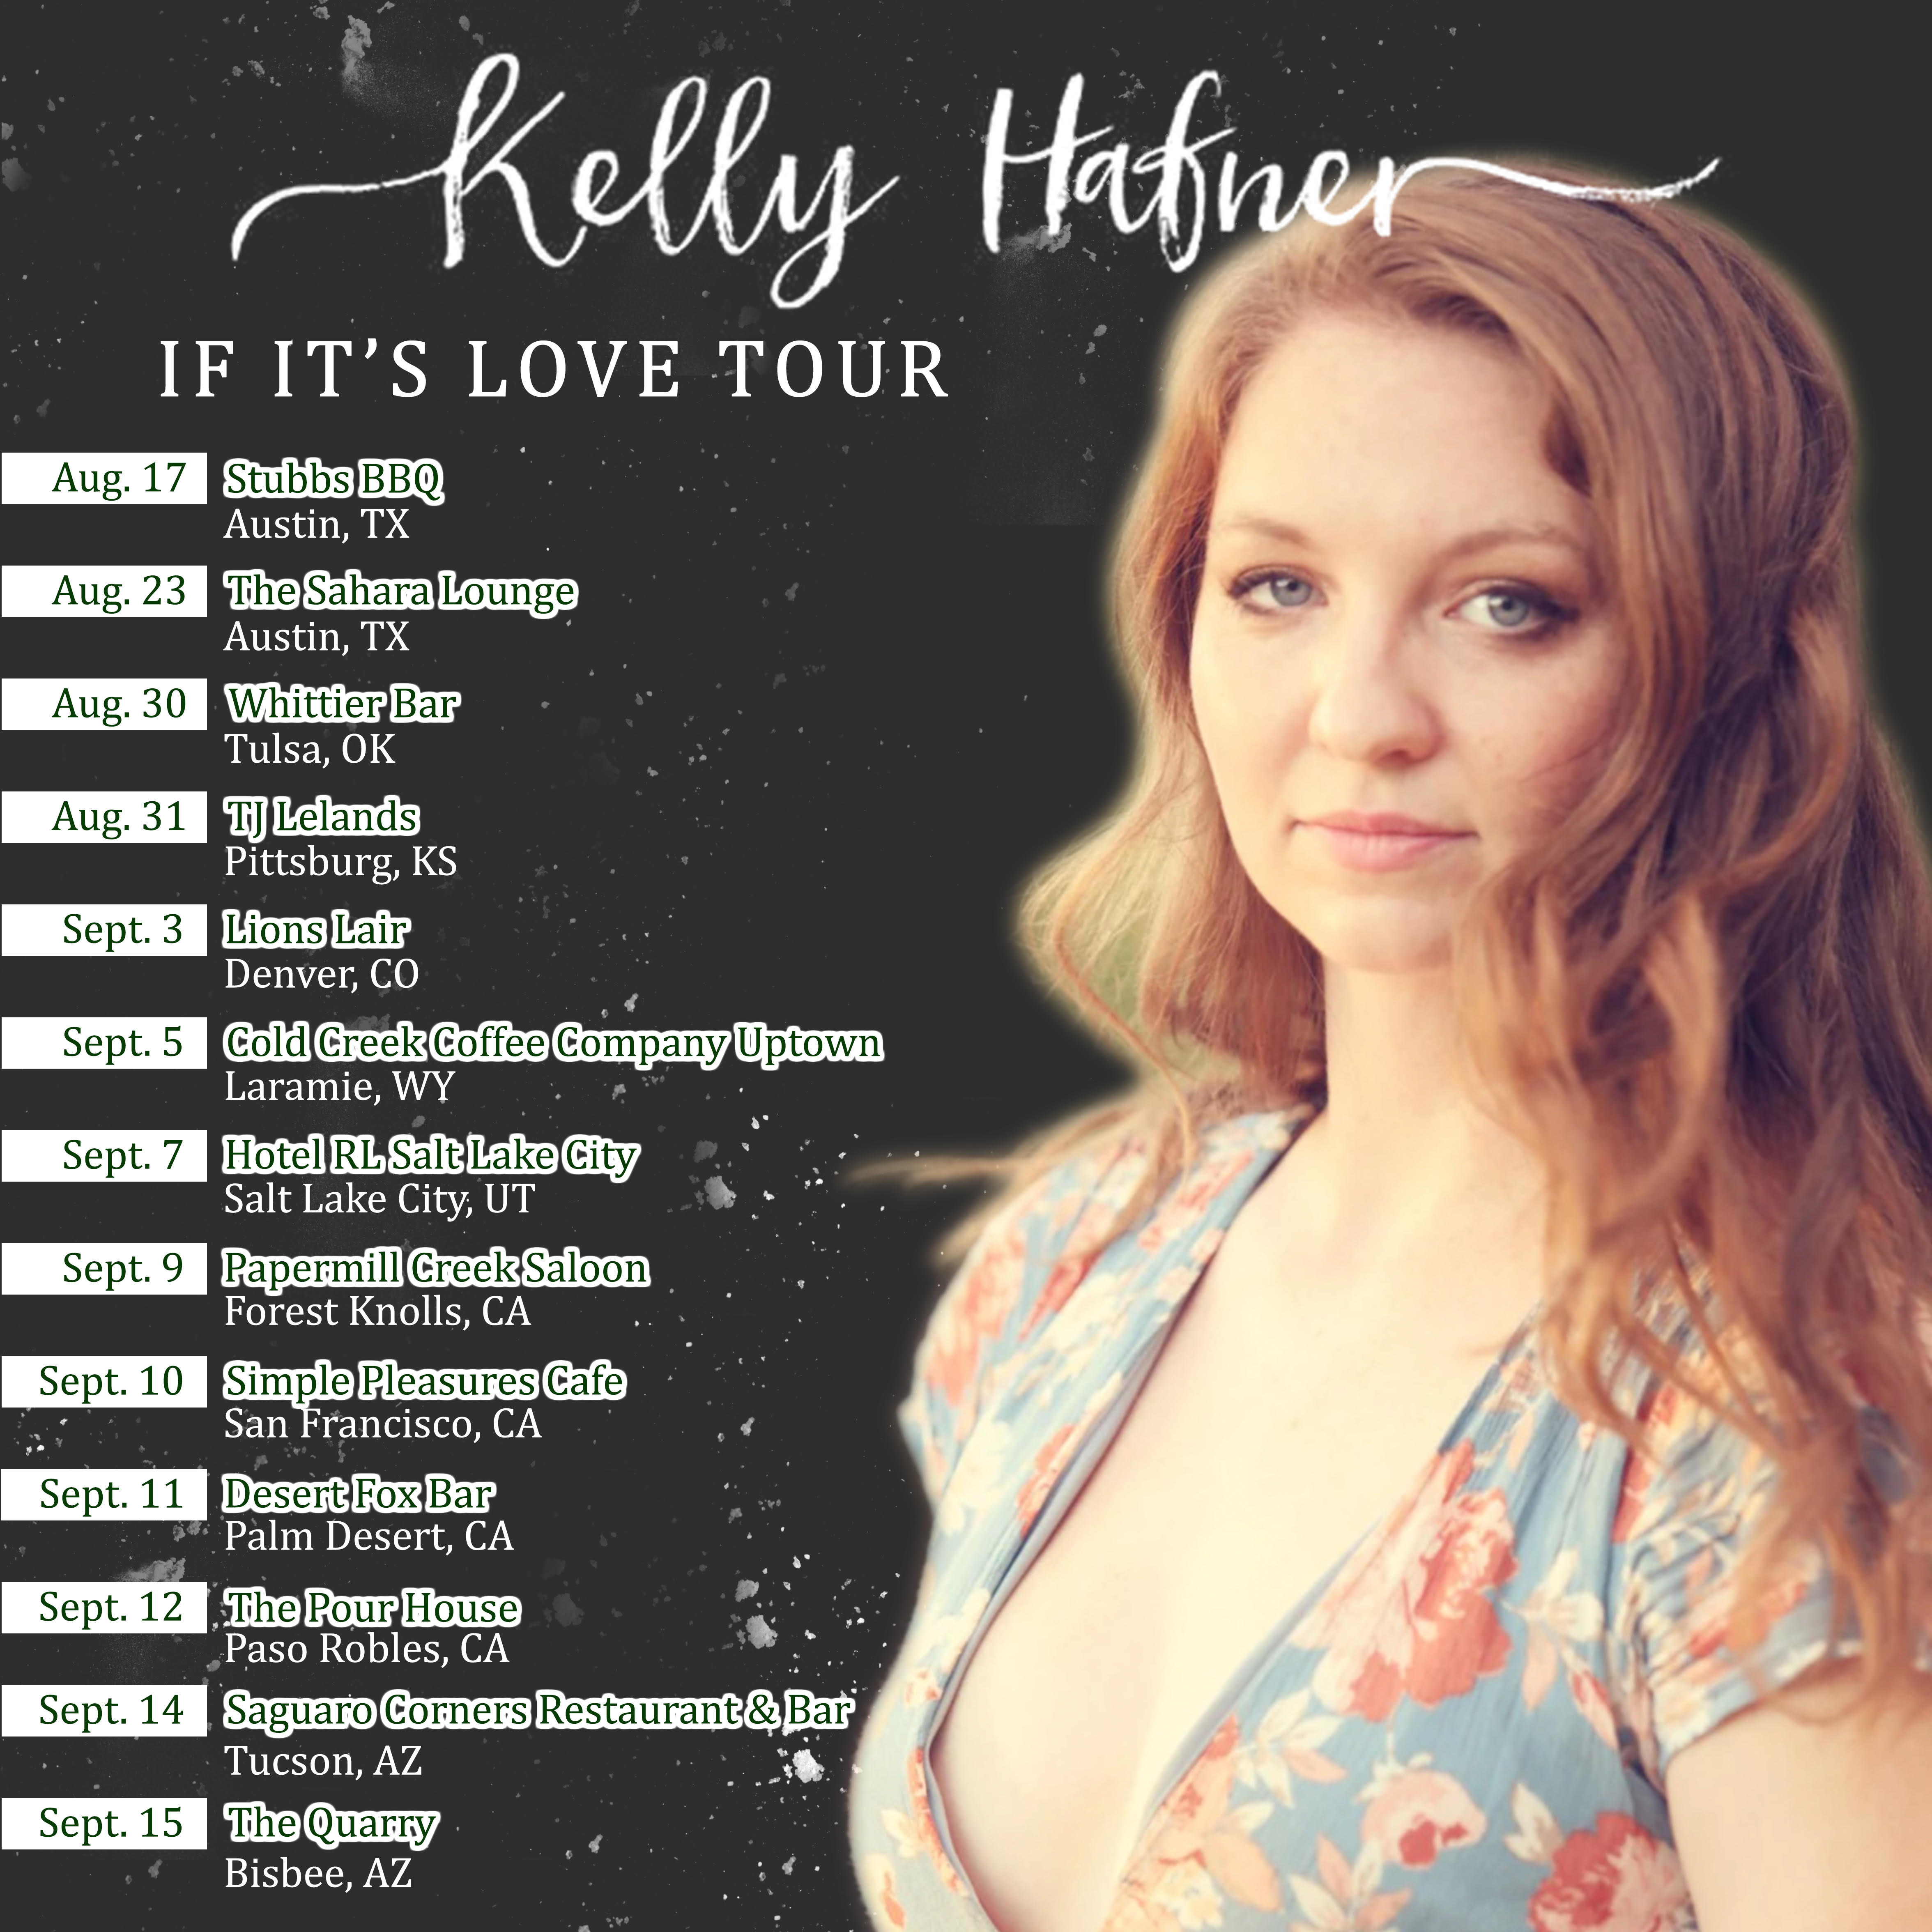 KELLY HAFNER EMBARKS ON US TOUR IN SUPPORT OF NEW ALBUM